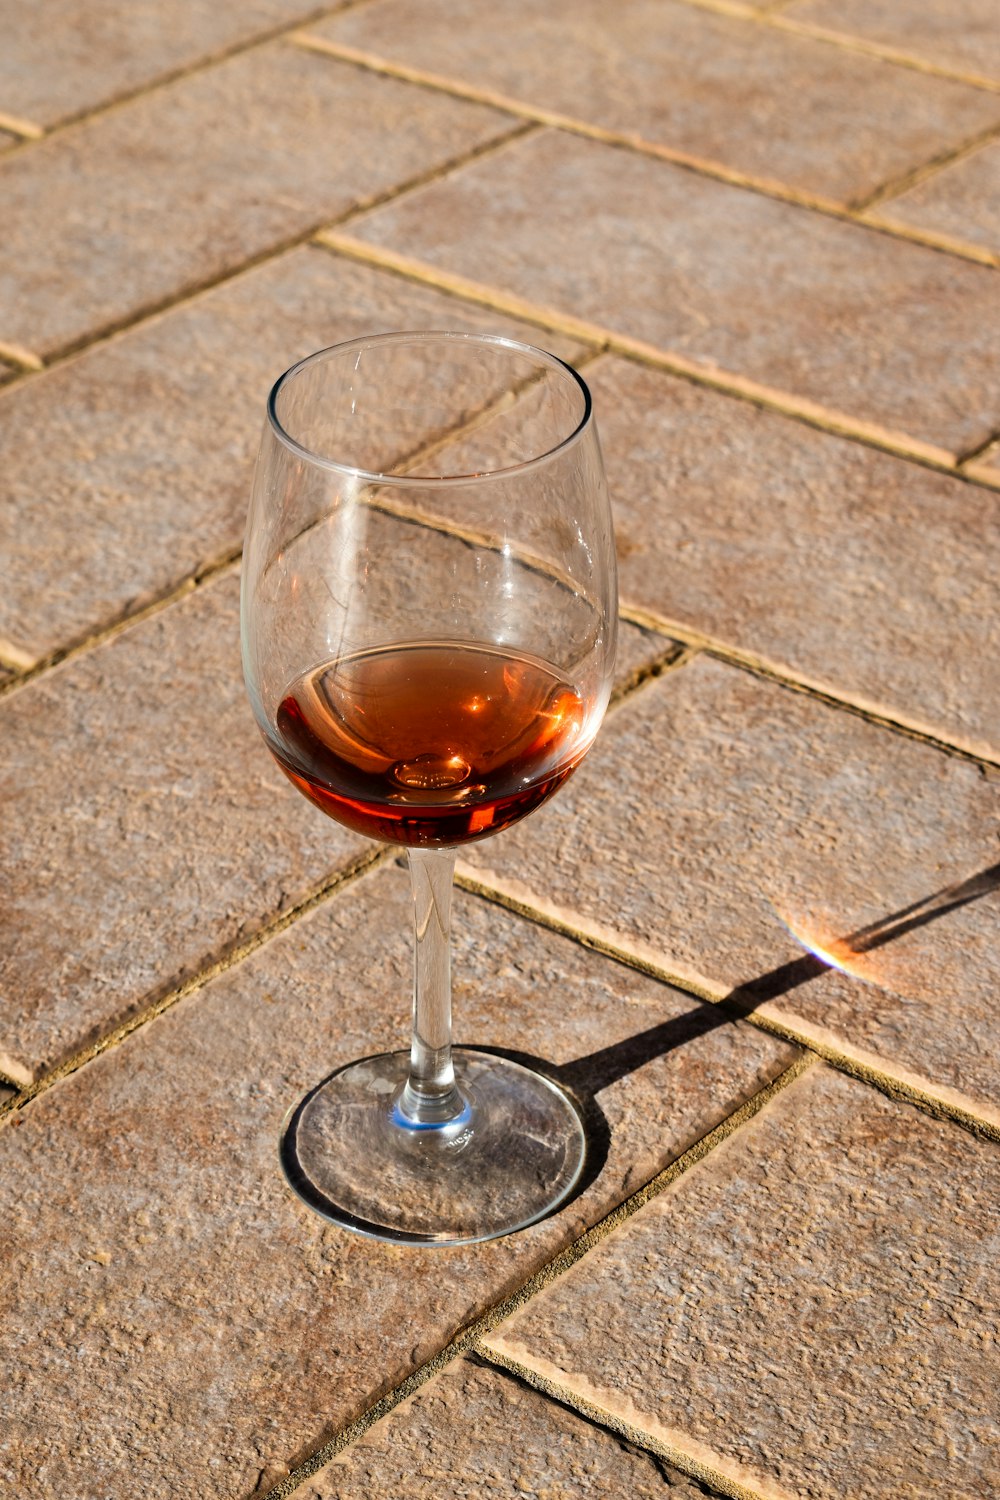 a glass of wine on a tile floor